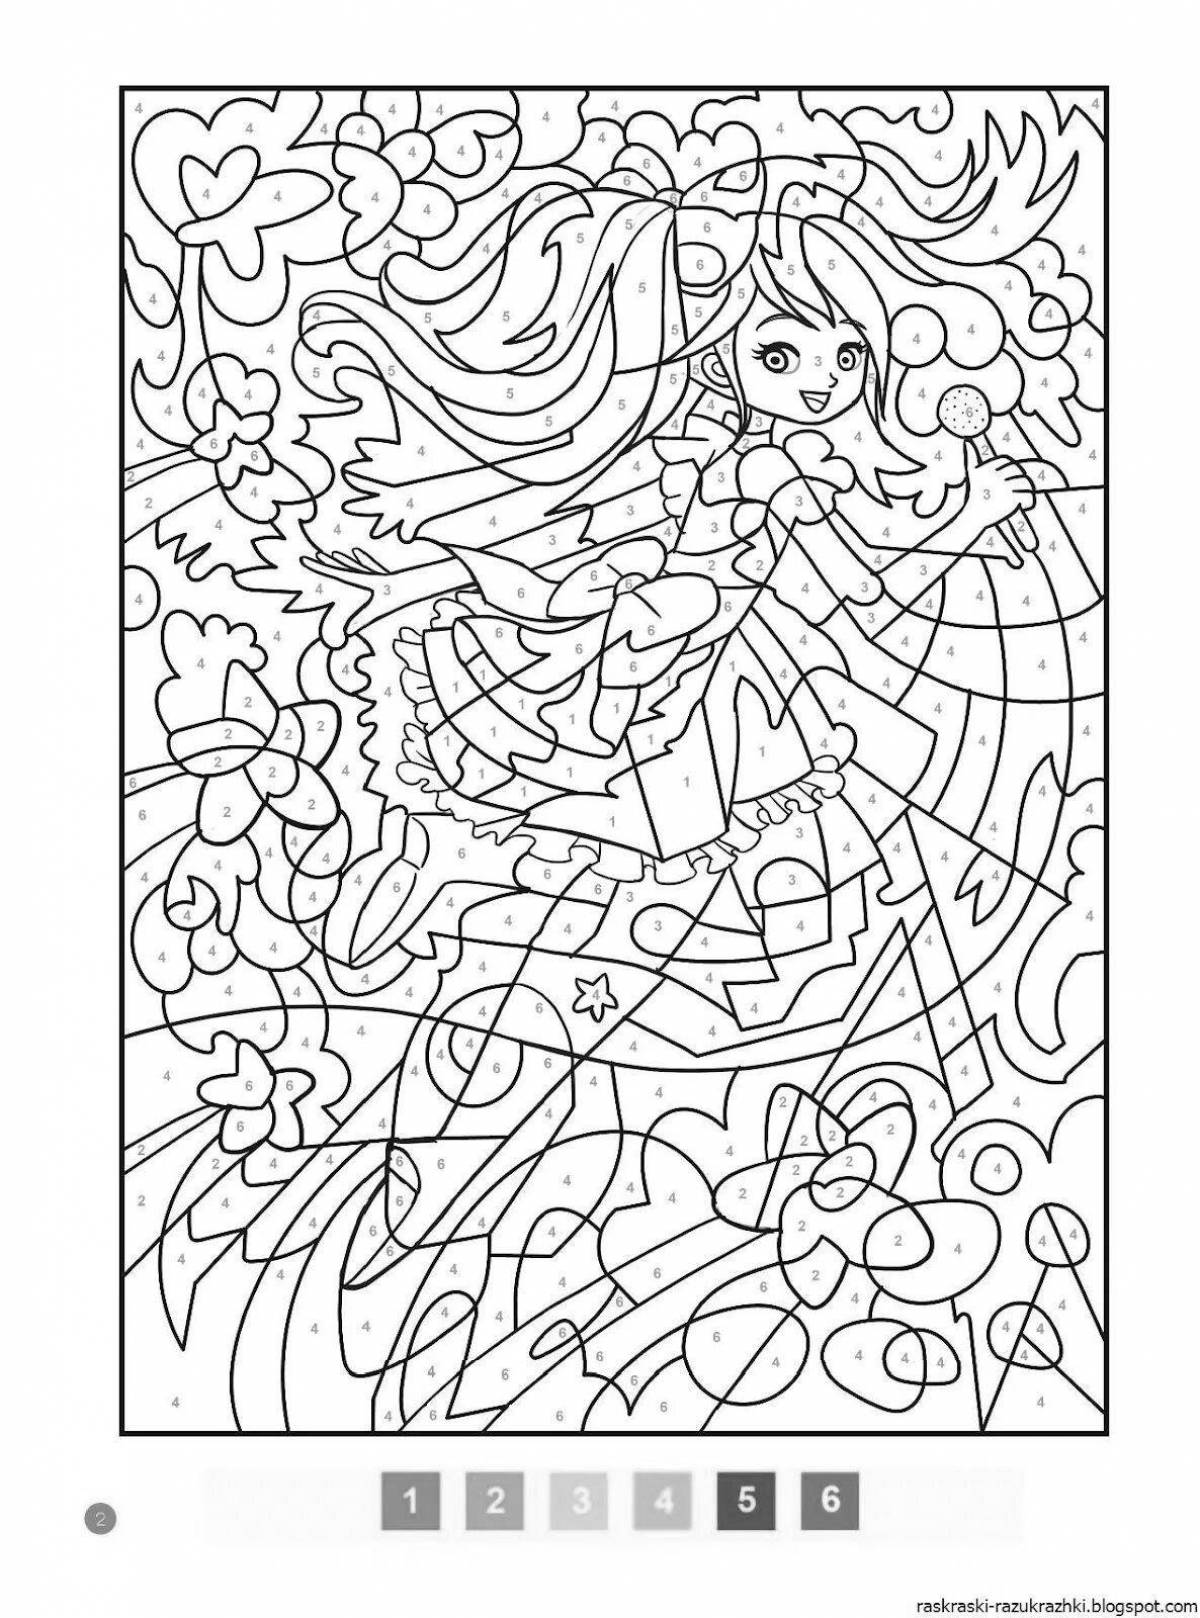 Art by number coloring book for all adults